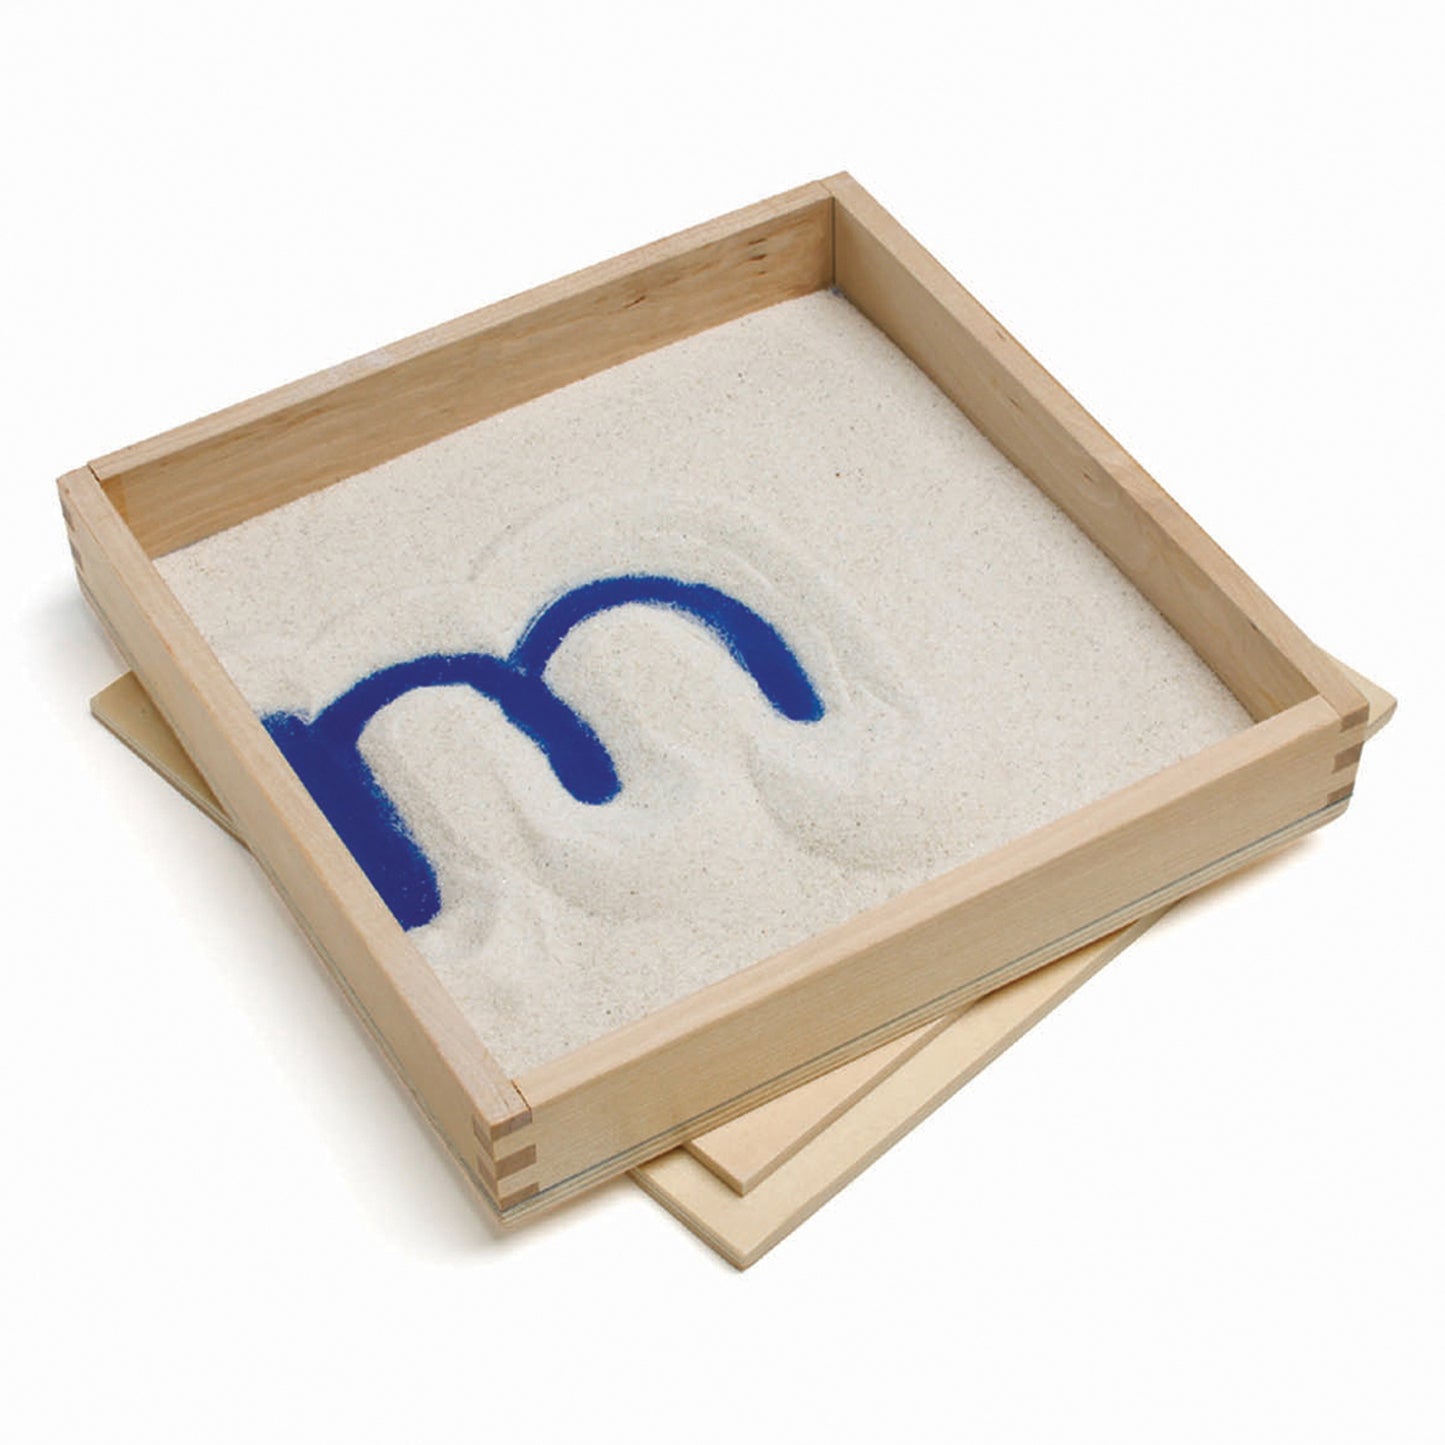 Primary Concepts Letter Formation Sand Tray - Tactile Learning Tool - 8" x 8" - Pack of 4